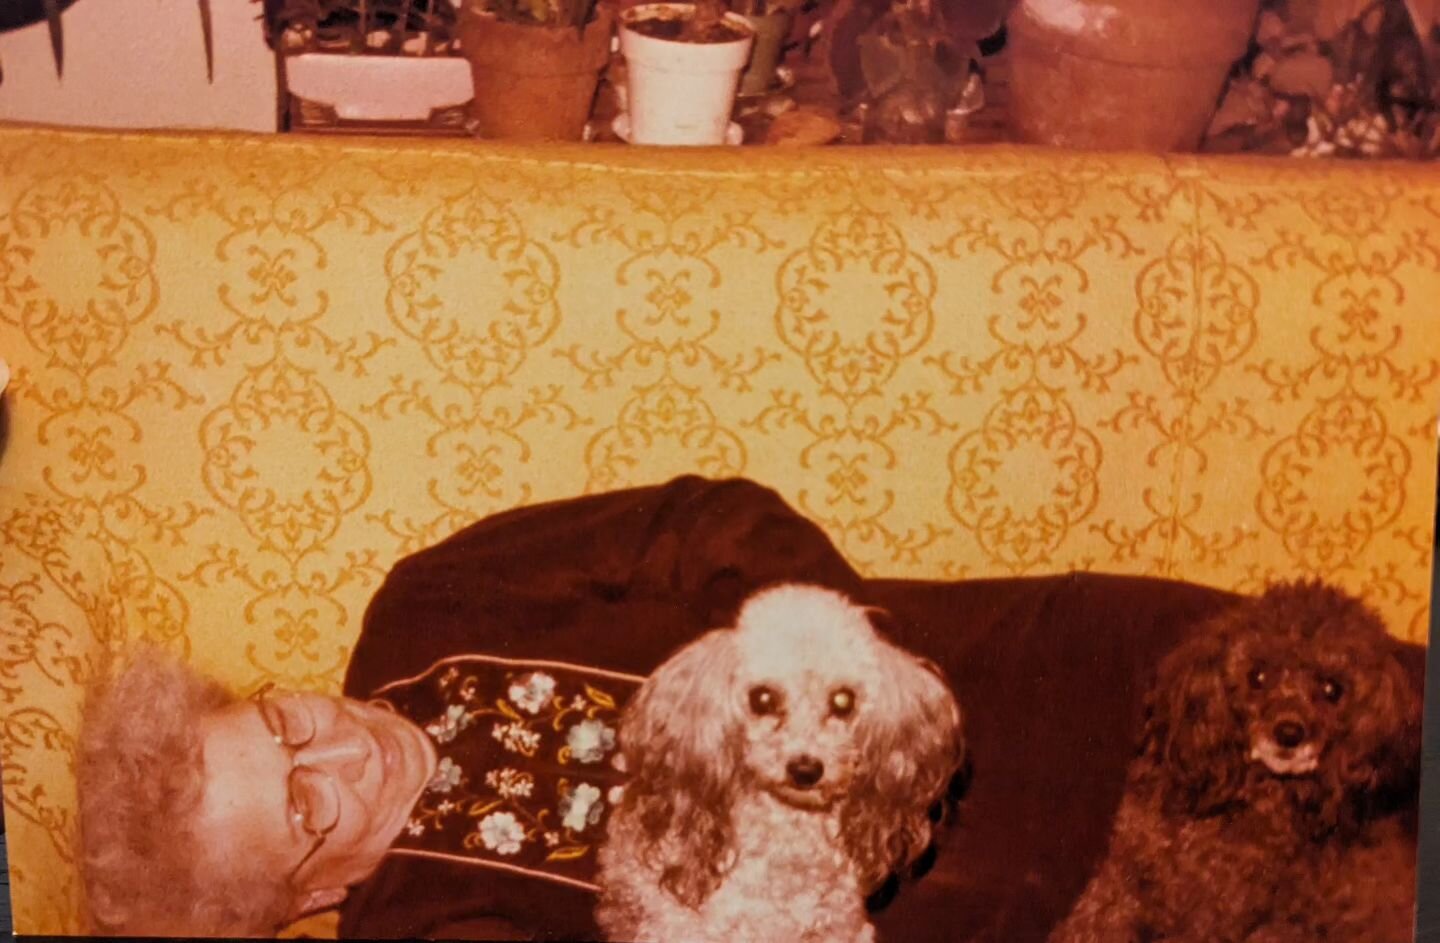 My Oma with some of her mini poodles in the 1970s. My aunt just gave me this photo and I thought it was so good. She said the gray guy's name is Buzz. What a dream.

#poodles #buzzthedog #minipoodle #minipoodlesofinstagram #1970s #vintagephoto #thewa